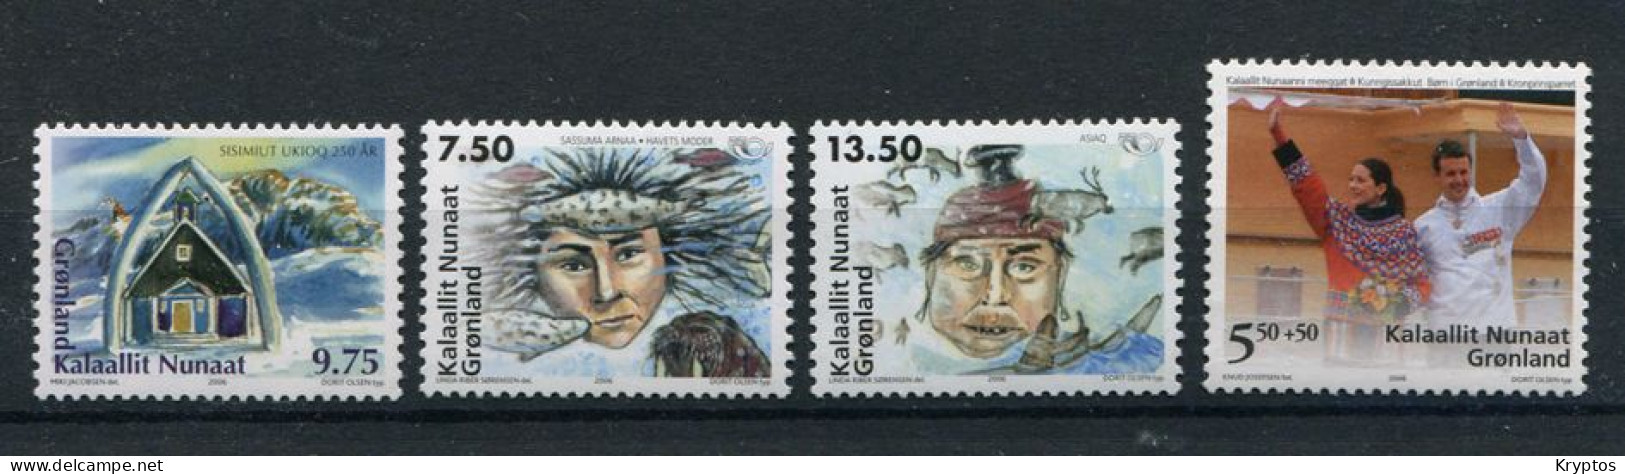 Greenland 2006. 4 Stamps. All MINT - Neufs